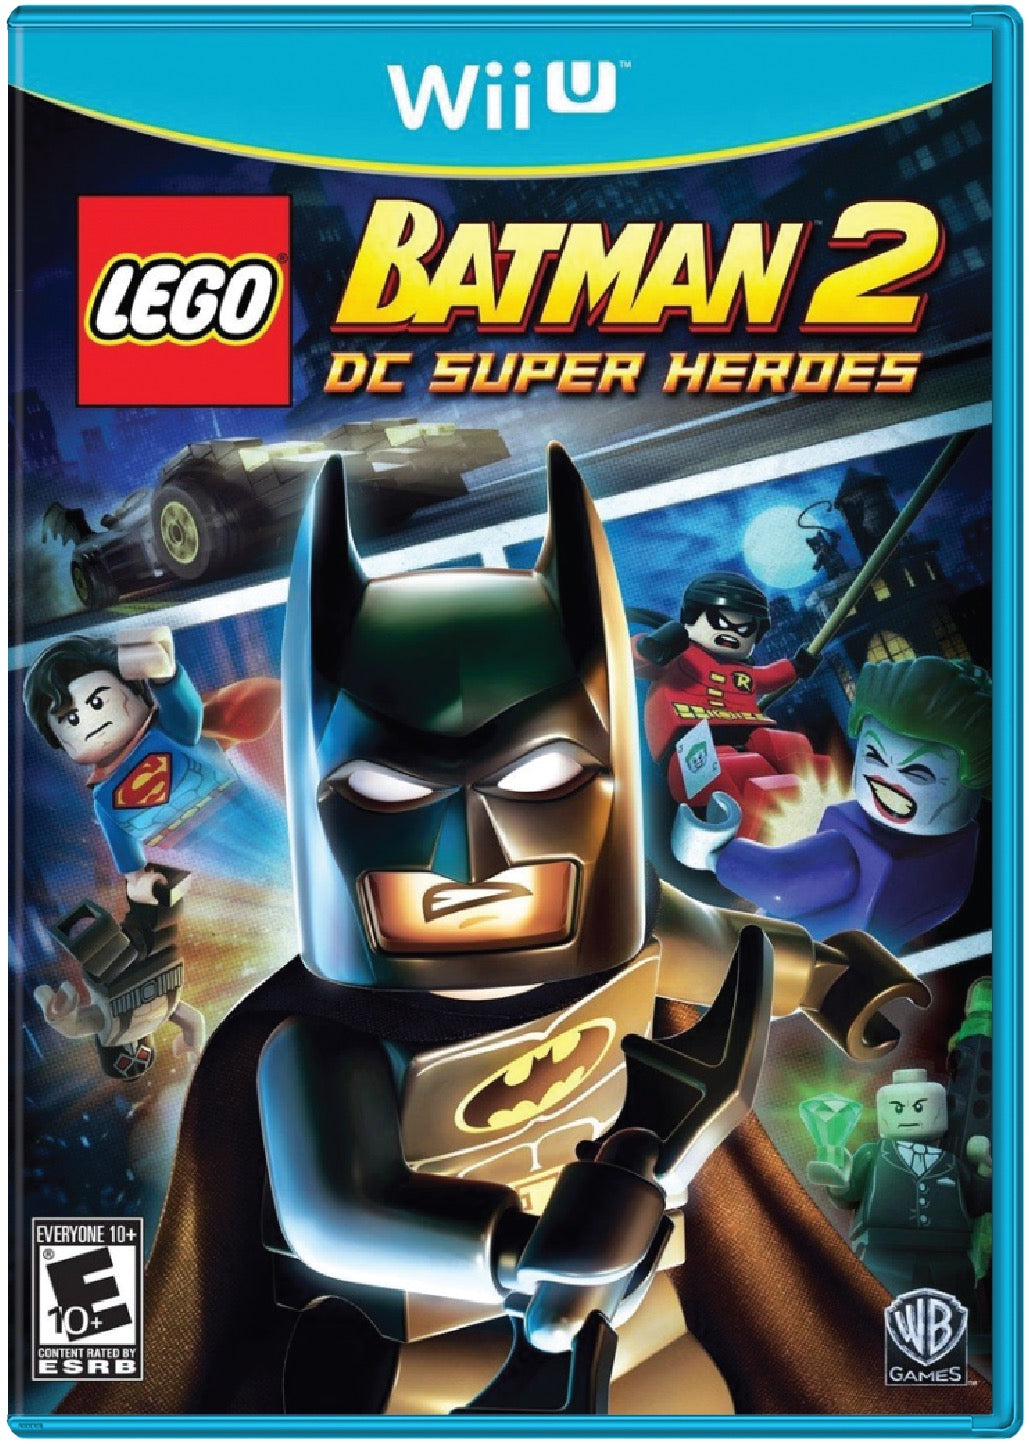 LEGO Batman 2 Cover Art and Product Photo